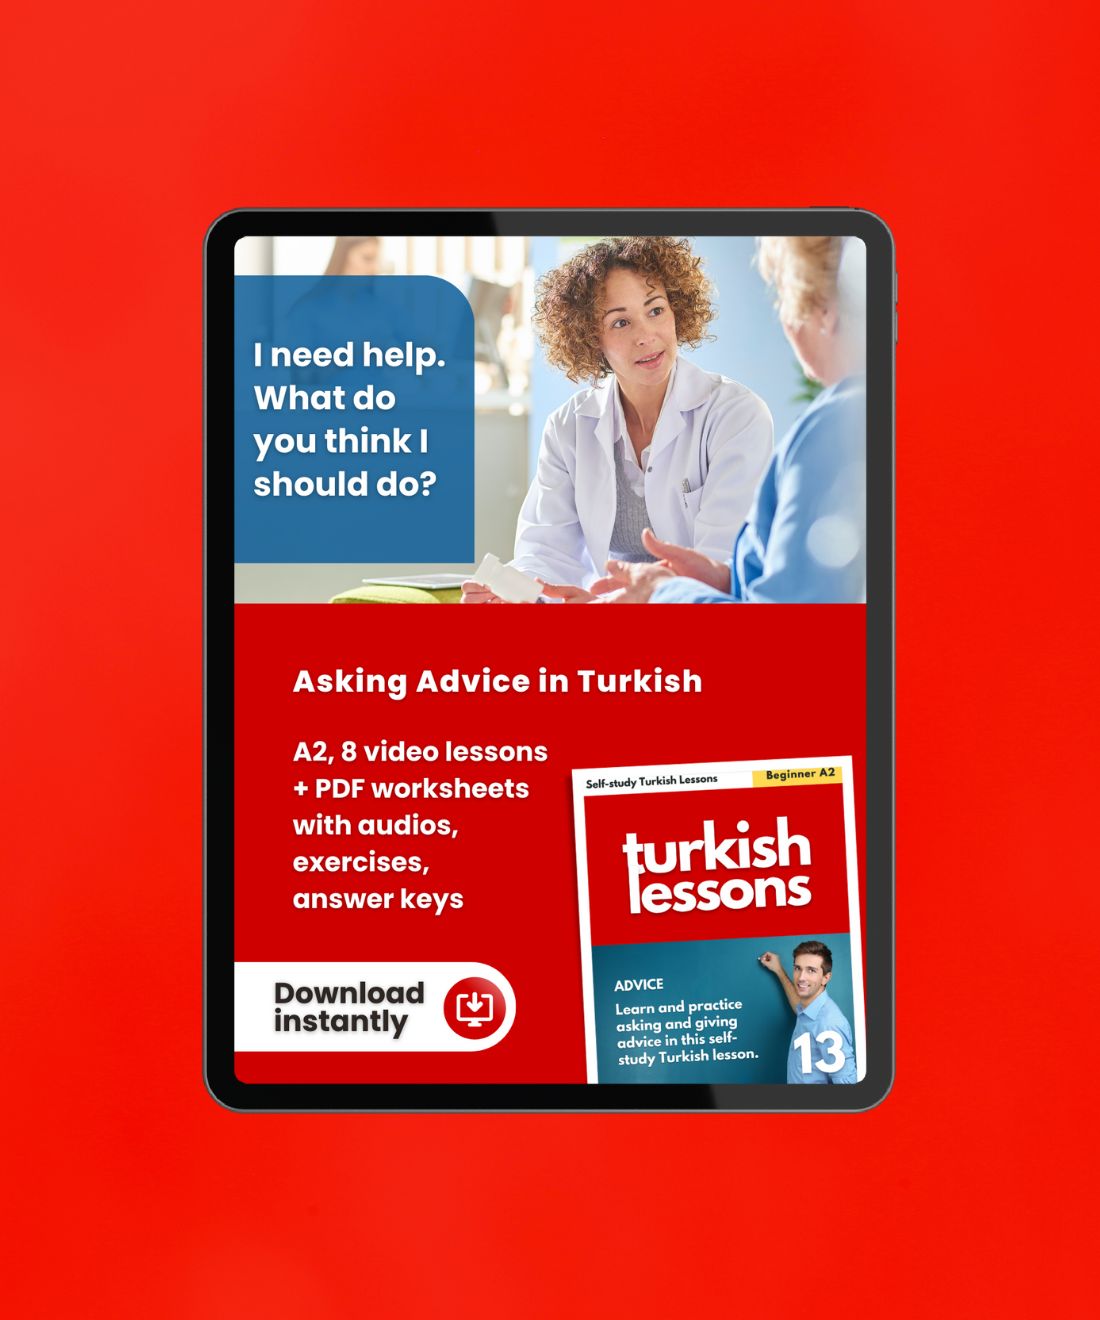 turkish lessons a2 - asking advice in turkish language